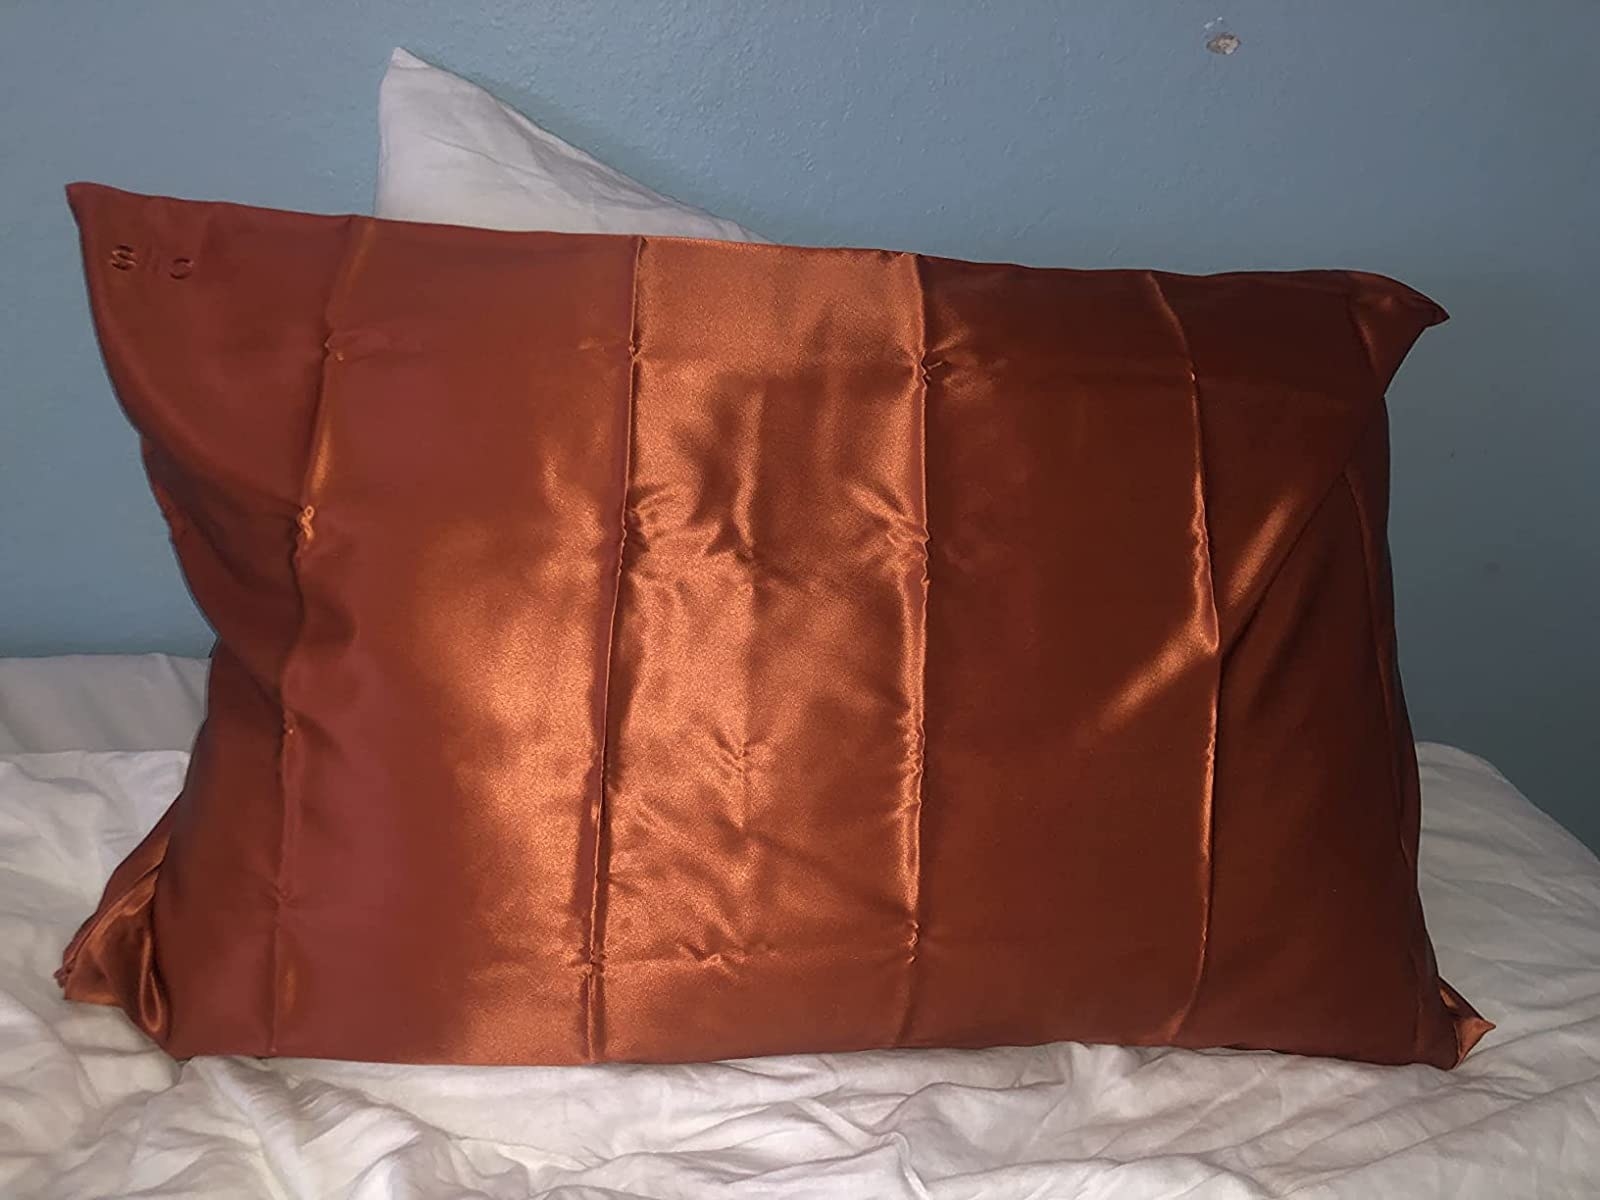 the pillowcase on a reviewers bed